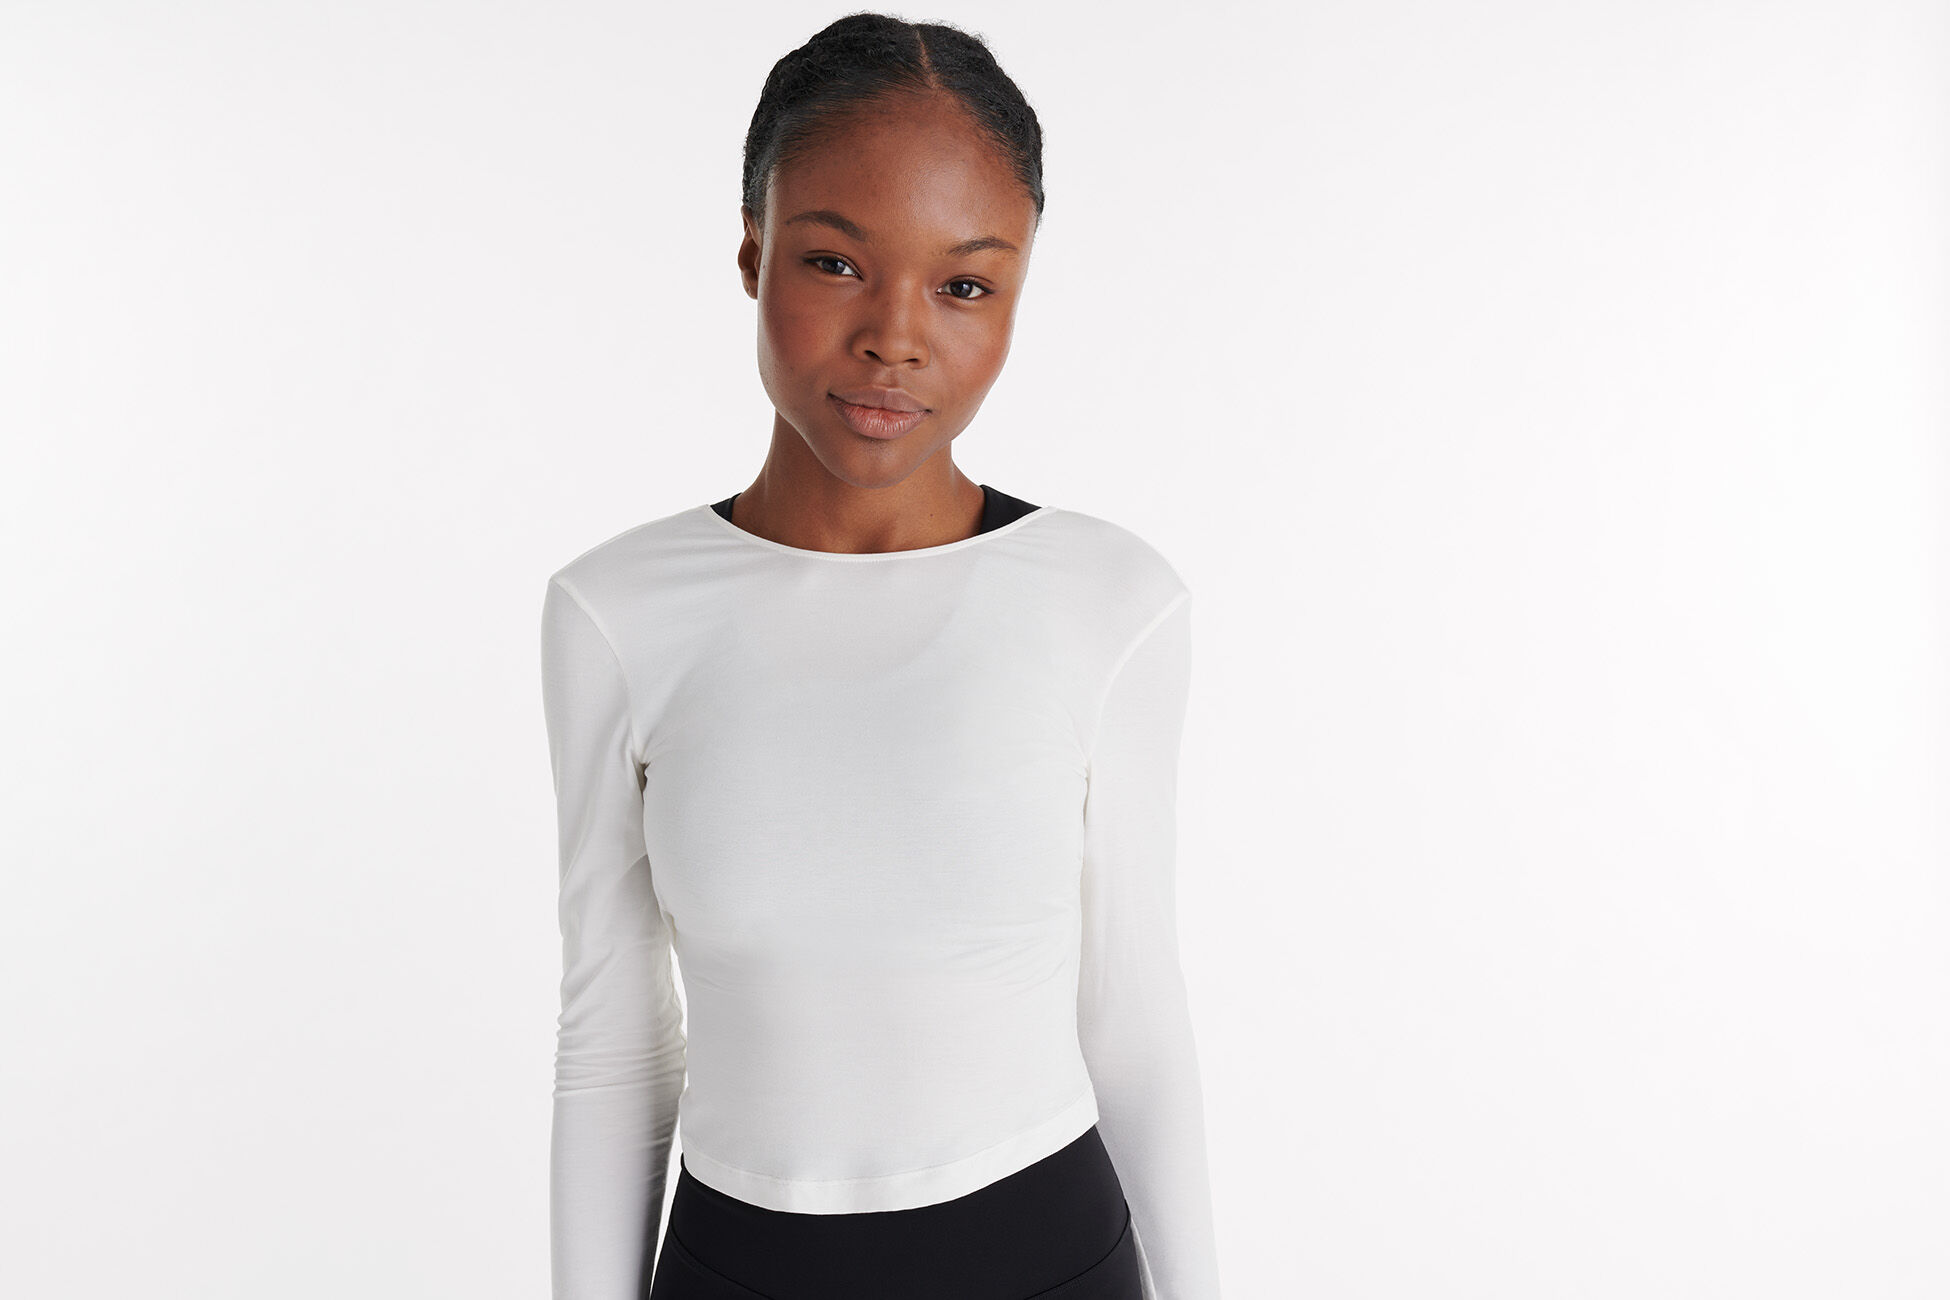 Florence Long sleeve top standard view �